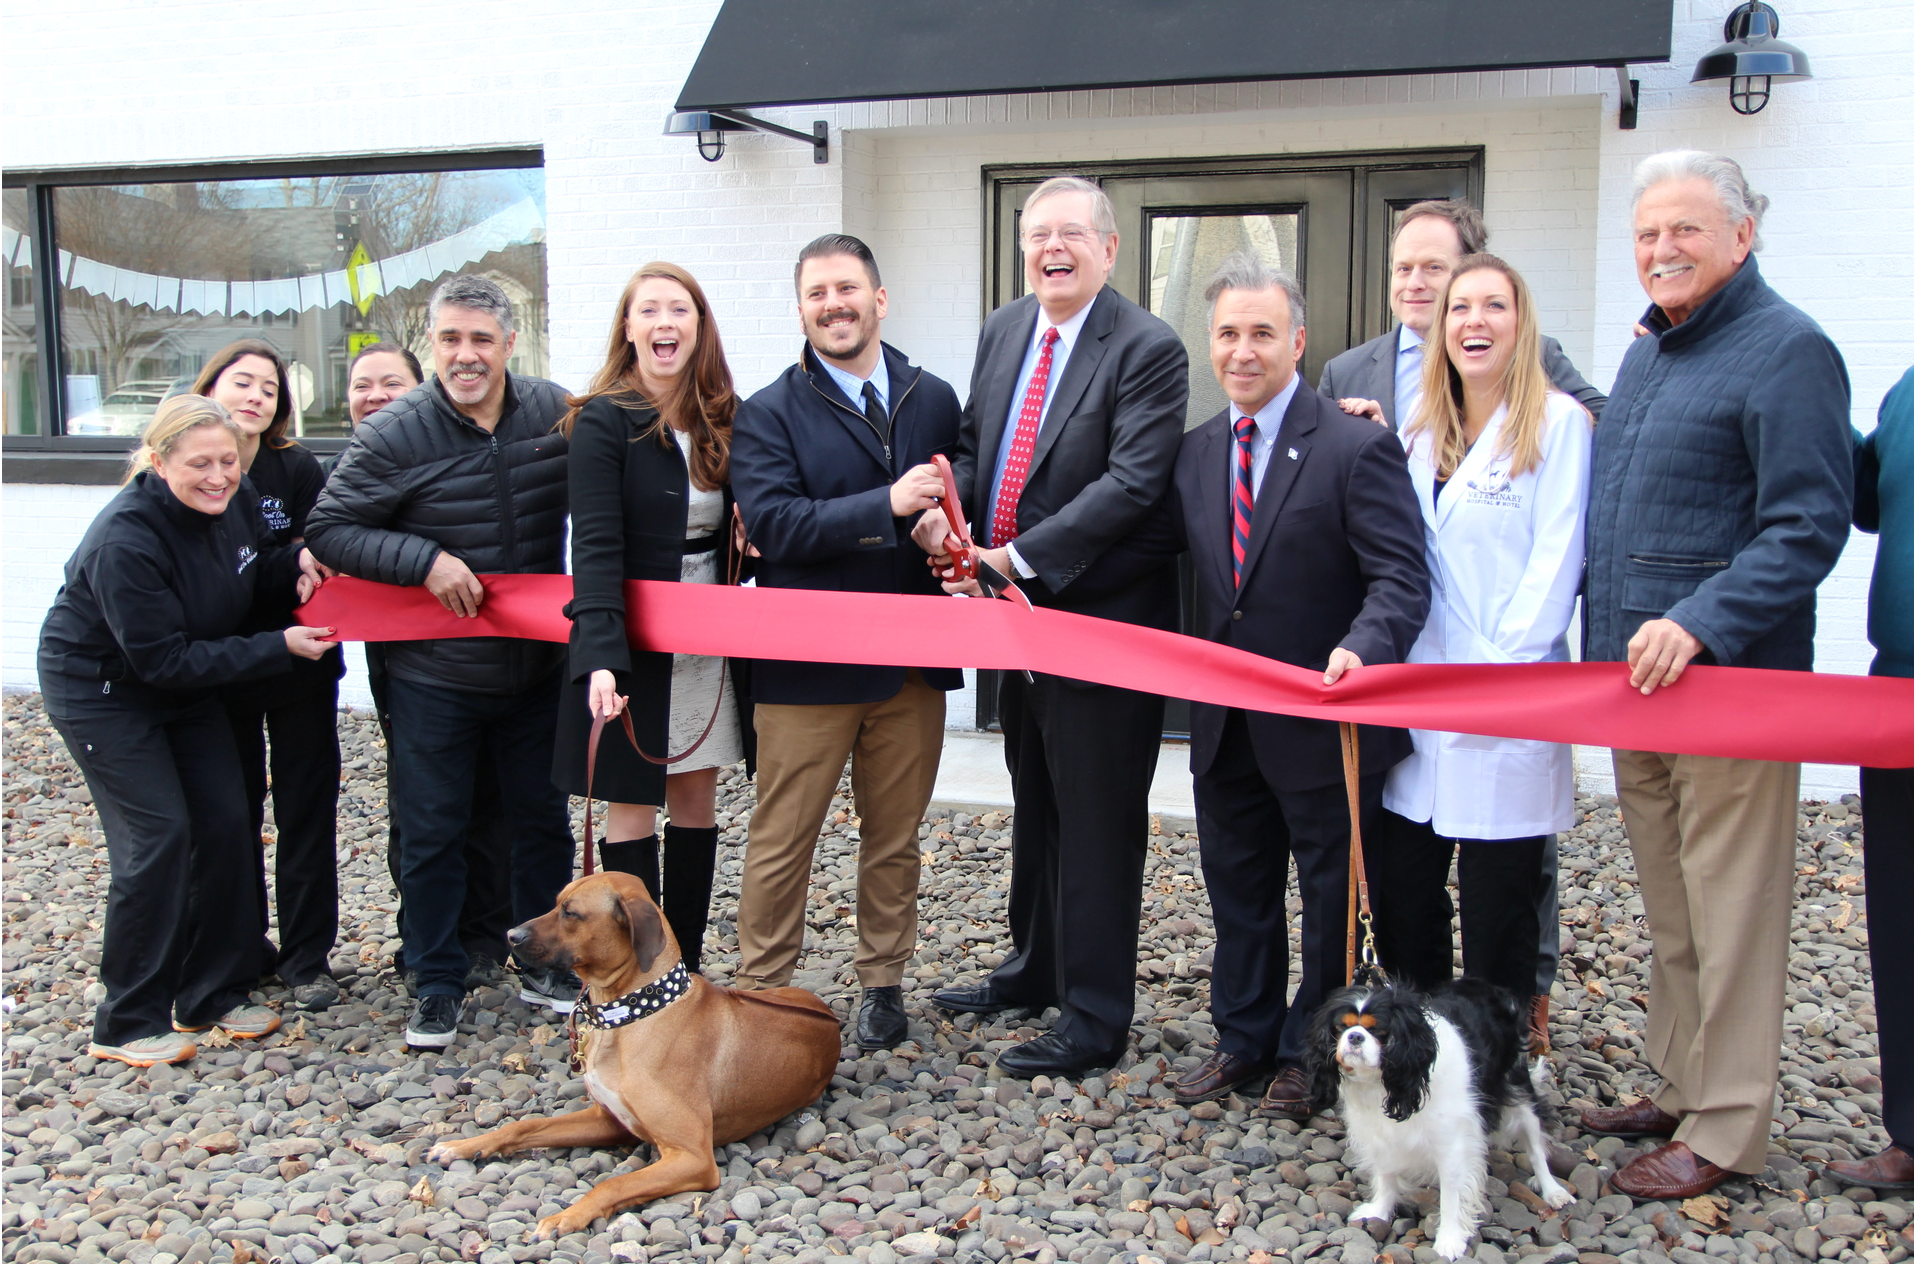 Ribbon cutting even at Spot On Veterinary Hospital &amp; Hotel in Stamford included Kaeley Blum, Gary Dell'Abate, Becky Putter, Dr. Philip Putter, Stamford Mayor David Martin, State Rep Fred Camillo, and Associate Veterinarian Dr. Suzanne Penswick. Dec 20, 2017 Photo: Leslie Yager